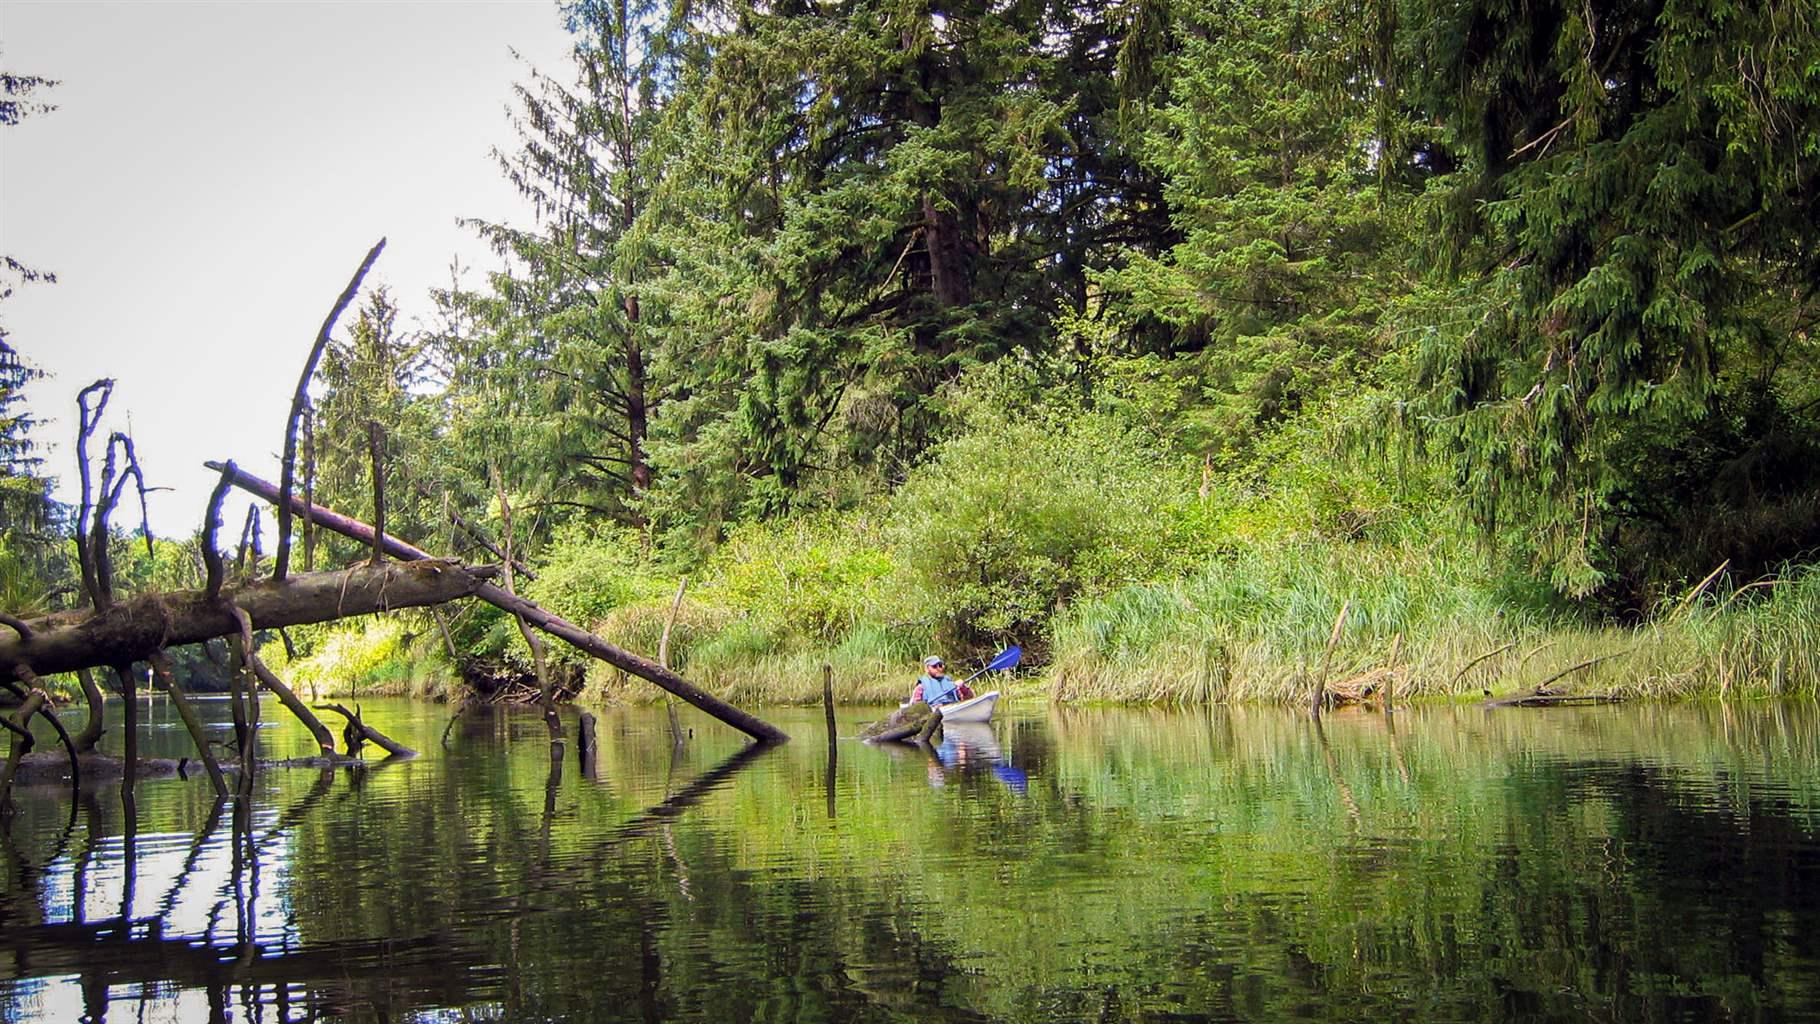 A person in a blue life jacket holding a double-ended paddle, propels a grey kayak through a river that runs through wetlands and forests. A collapsed tree rests above the waterway on the left.